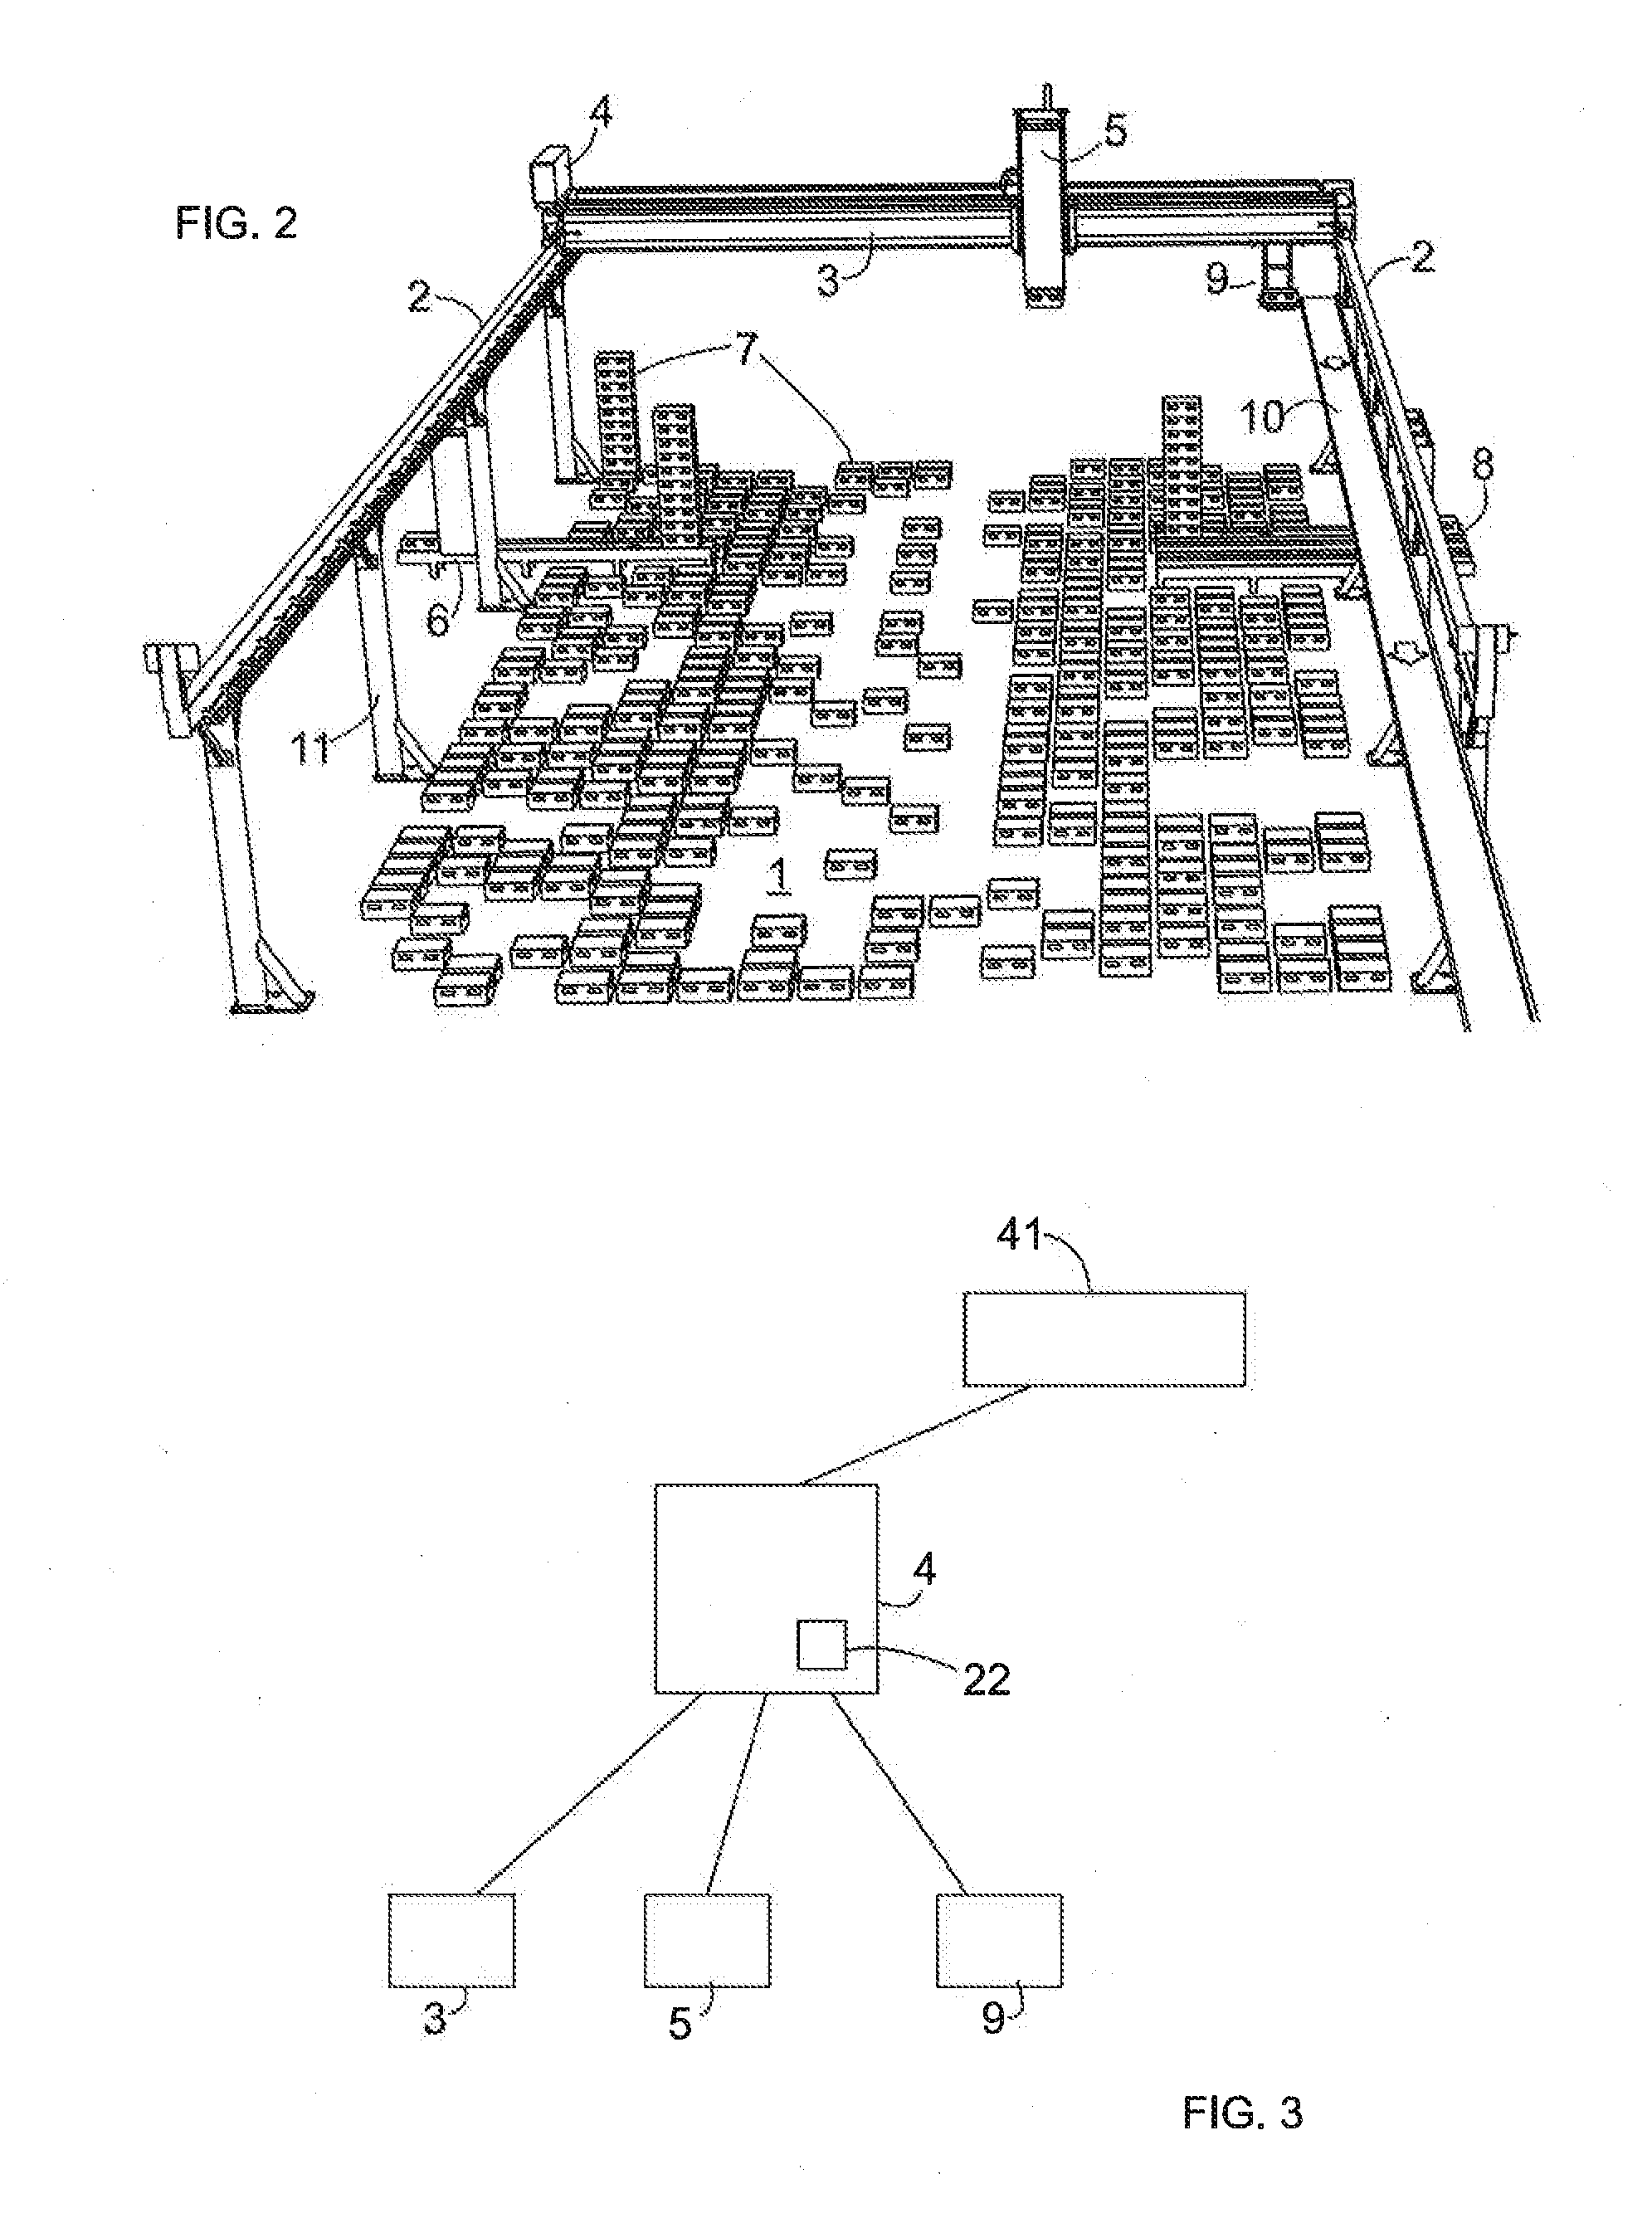 Overhead robot system and a method for its operation